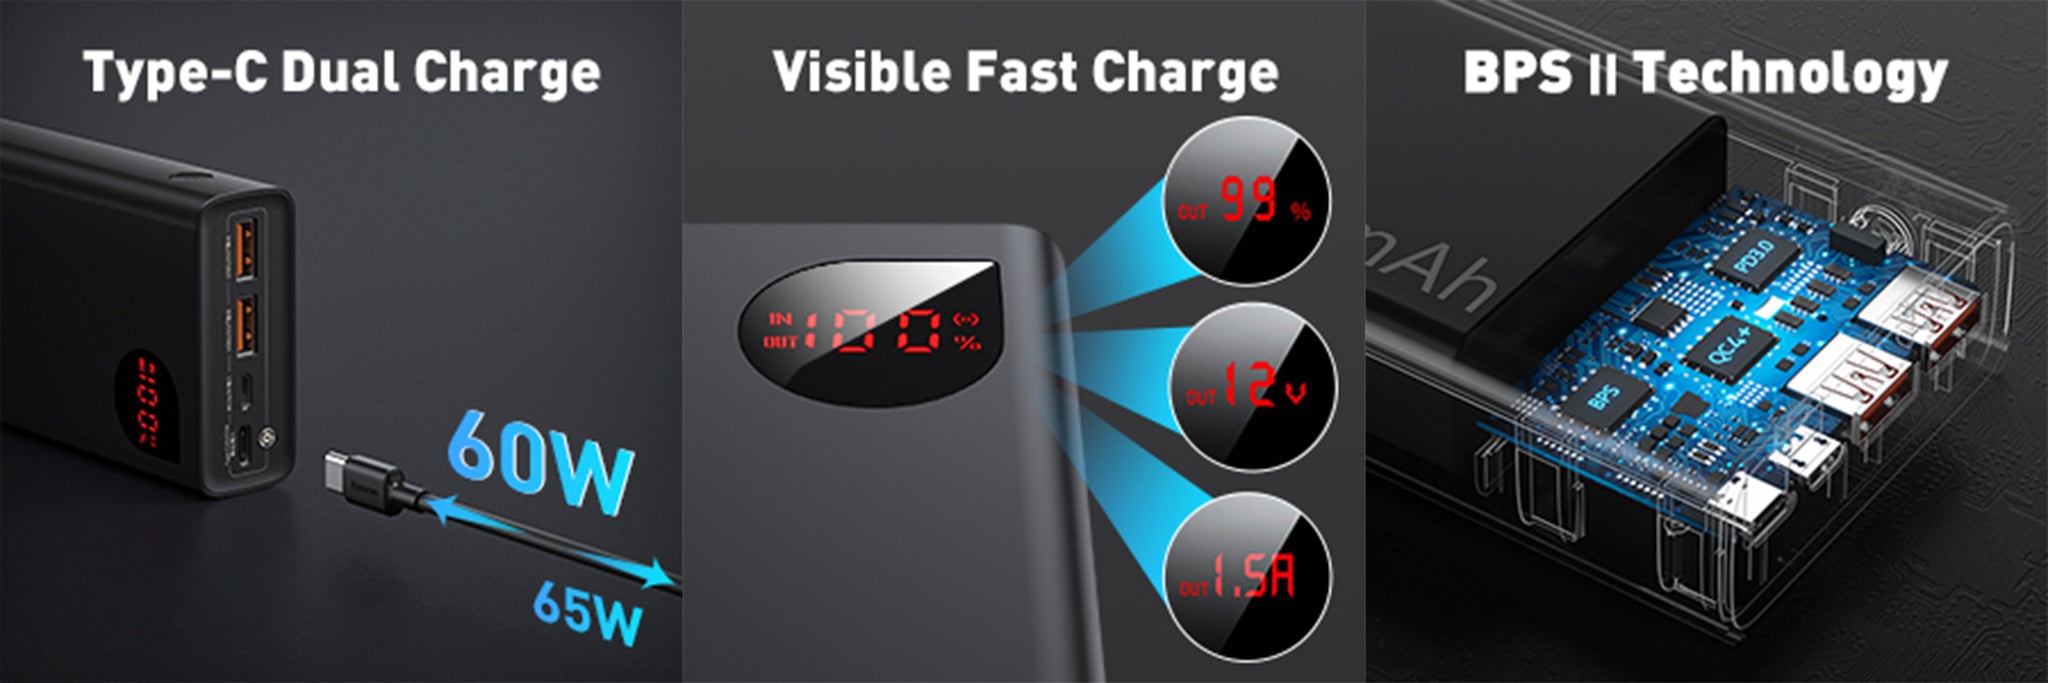 PISEN 20000mAh USB C Portable Charger Power Bank, 22.5W PD QC 3.0 Fast  Charging External Phone Battery Pack Charger with LED Display, Tri-Outputs  